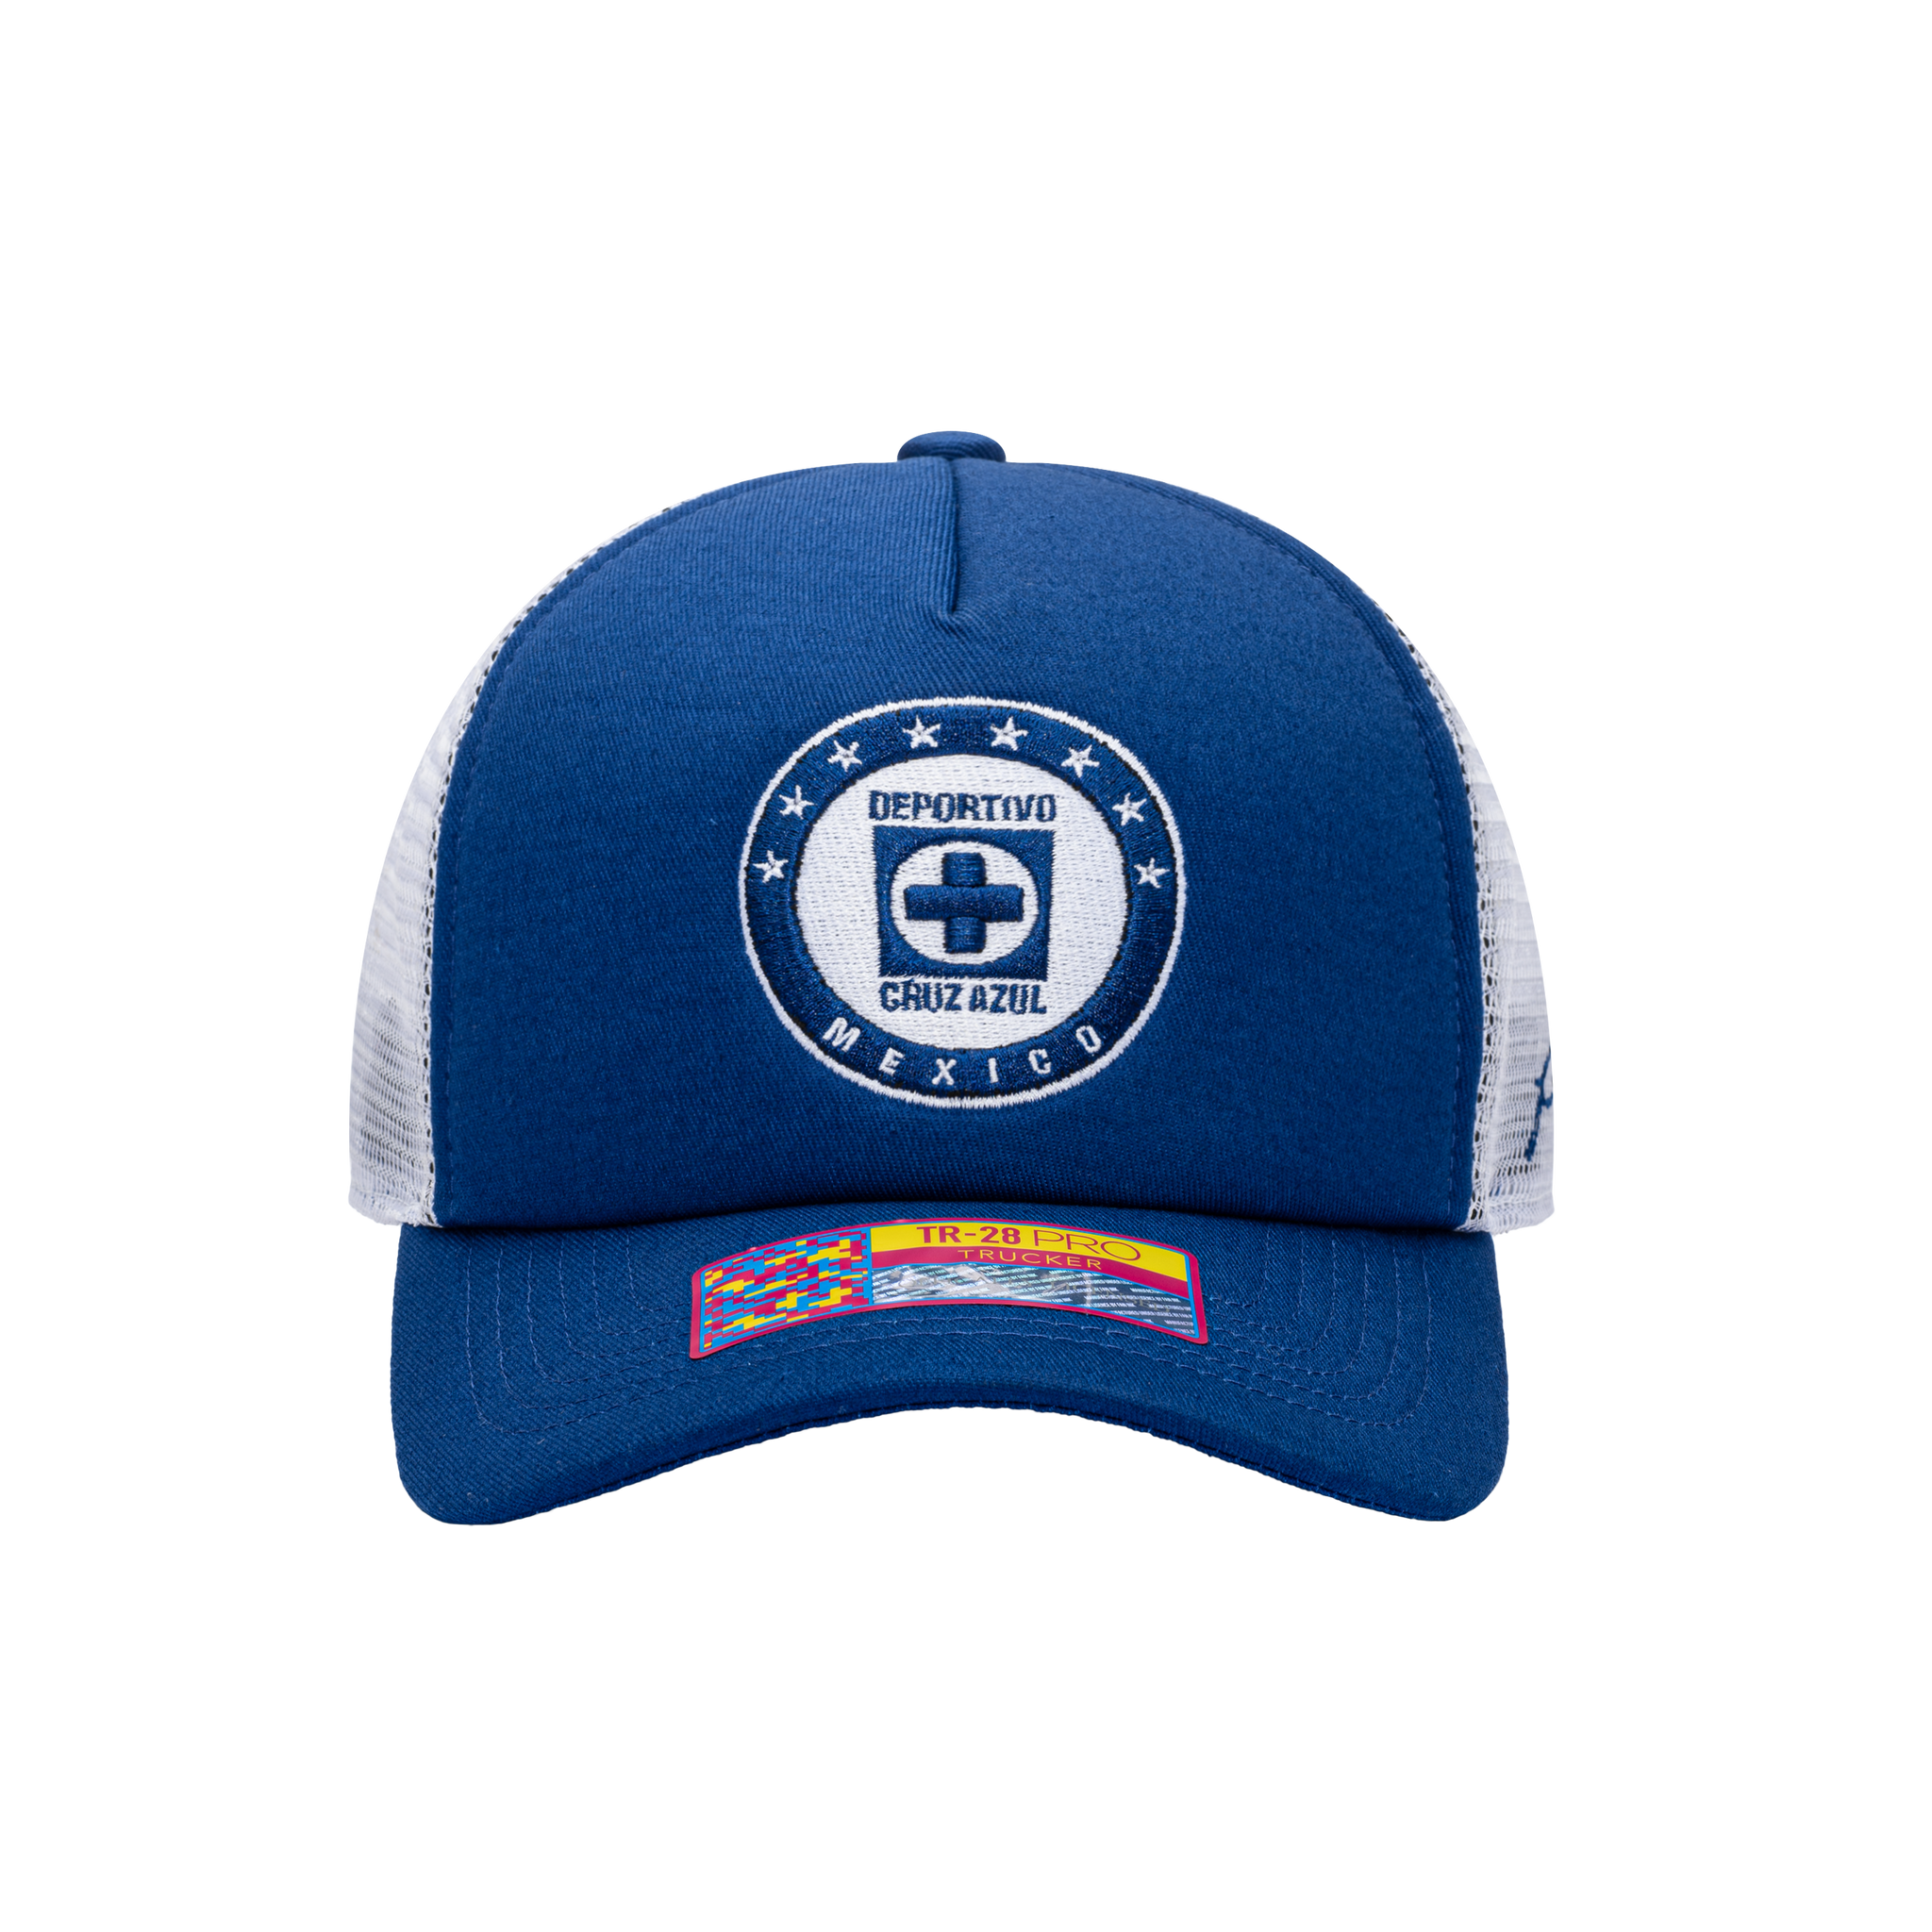 Front view of the Cruz Azul Fog Trucker Hat in Navy/White, with high crown, curved peak, mesh back and snapback closure.